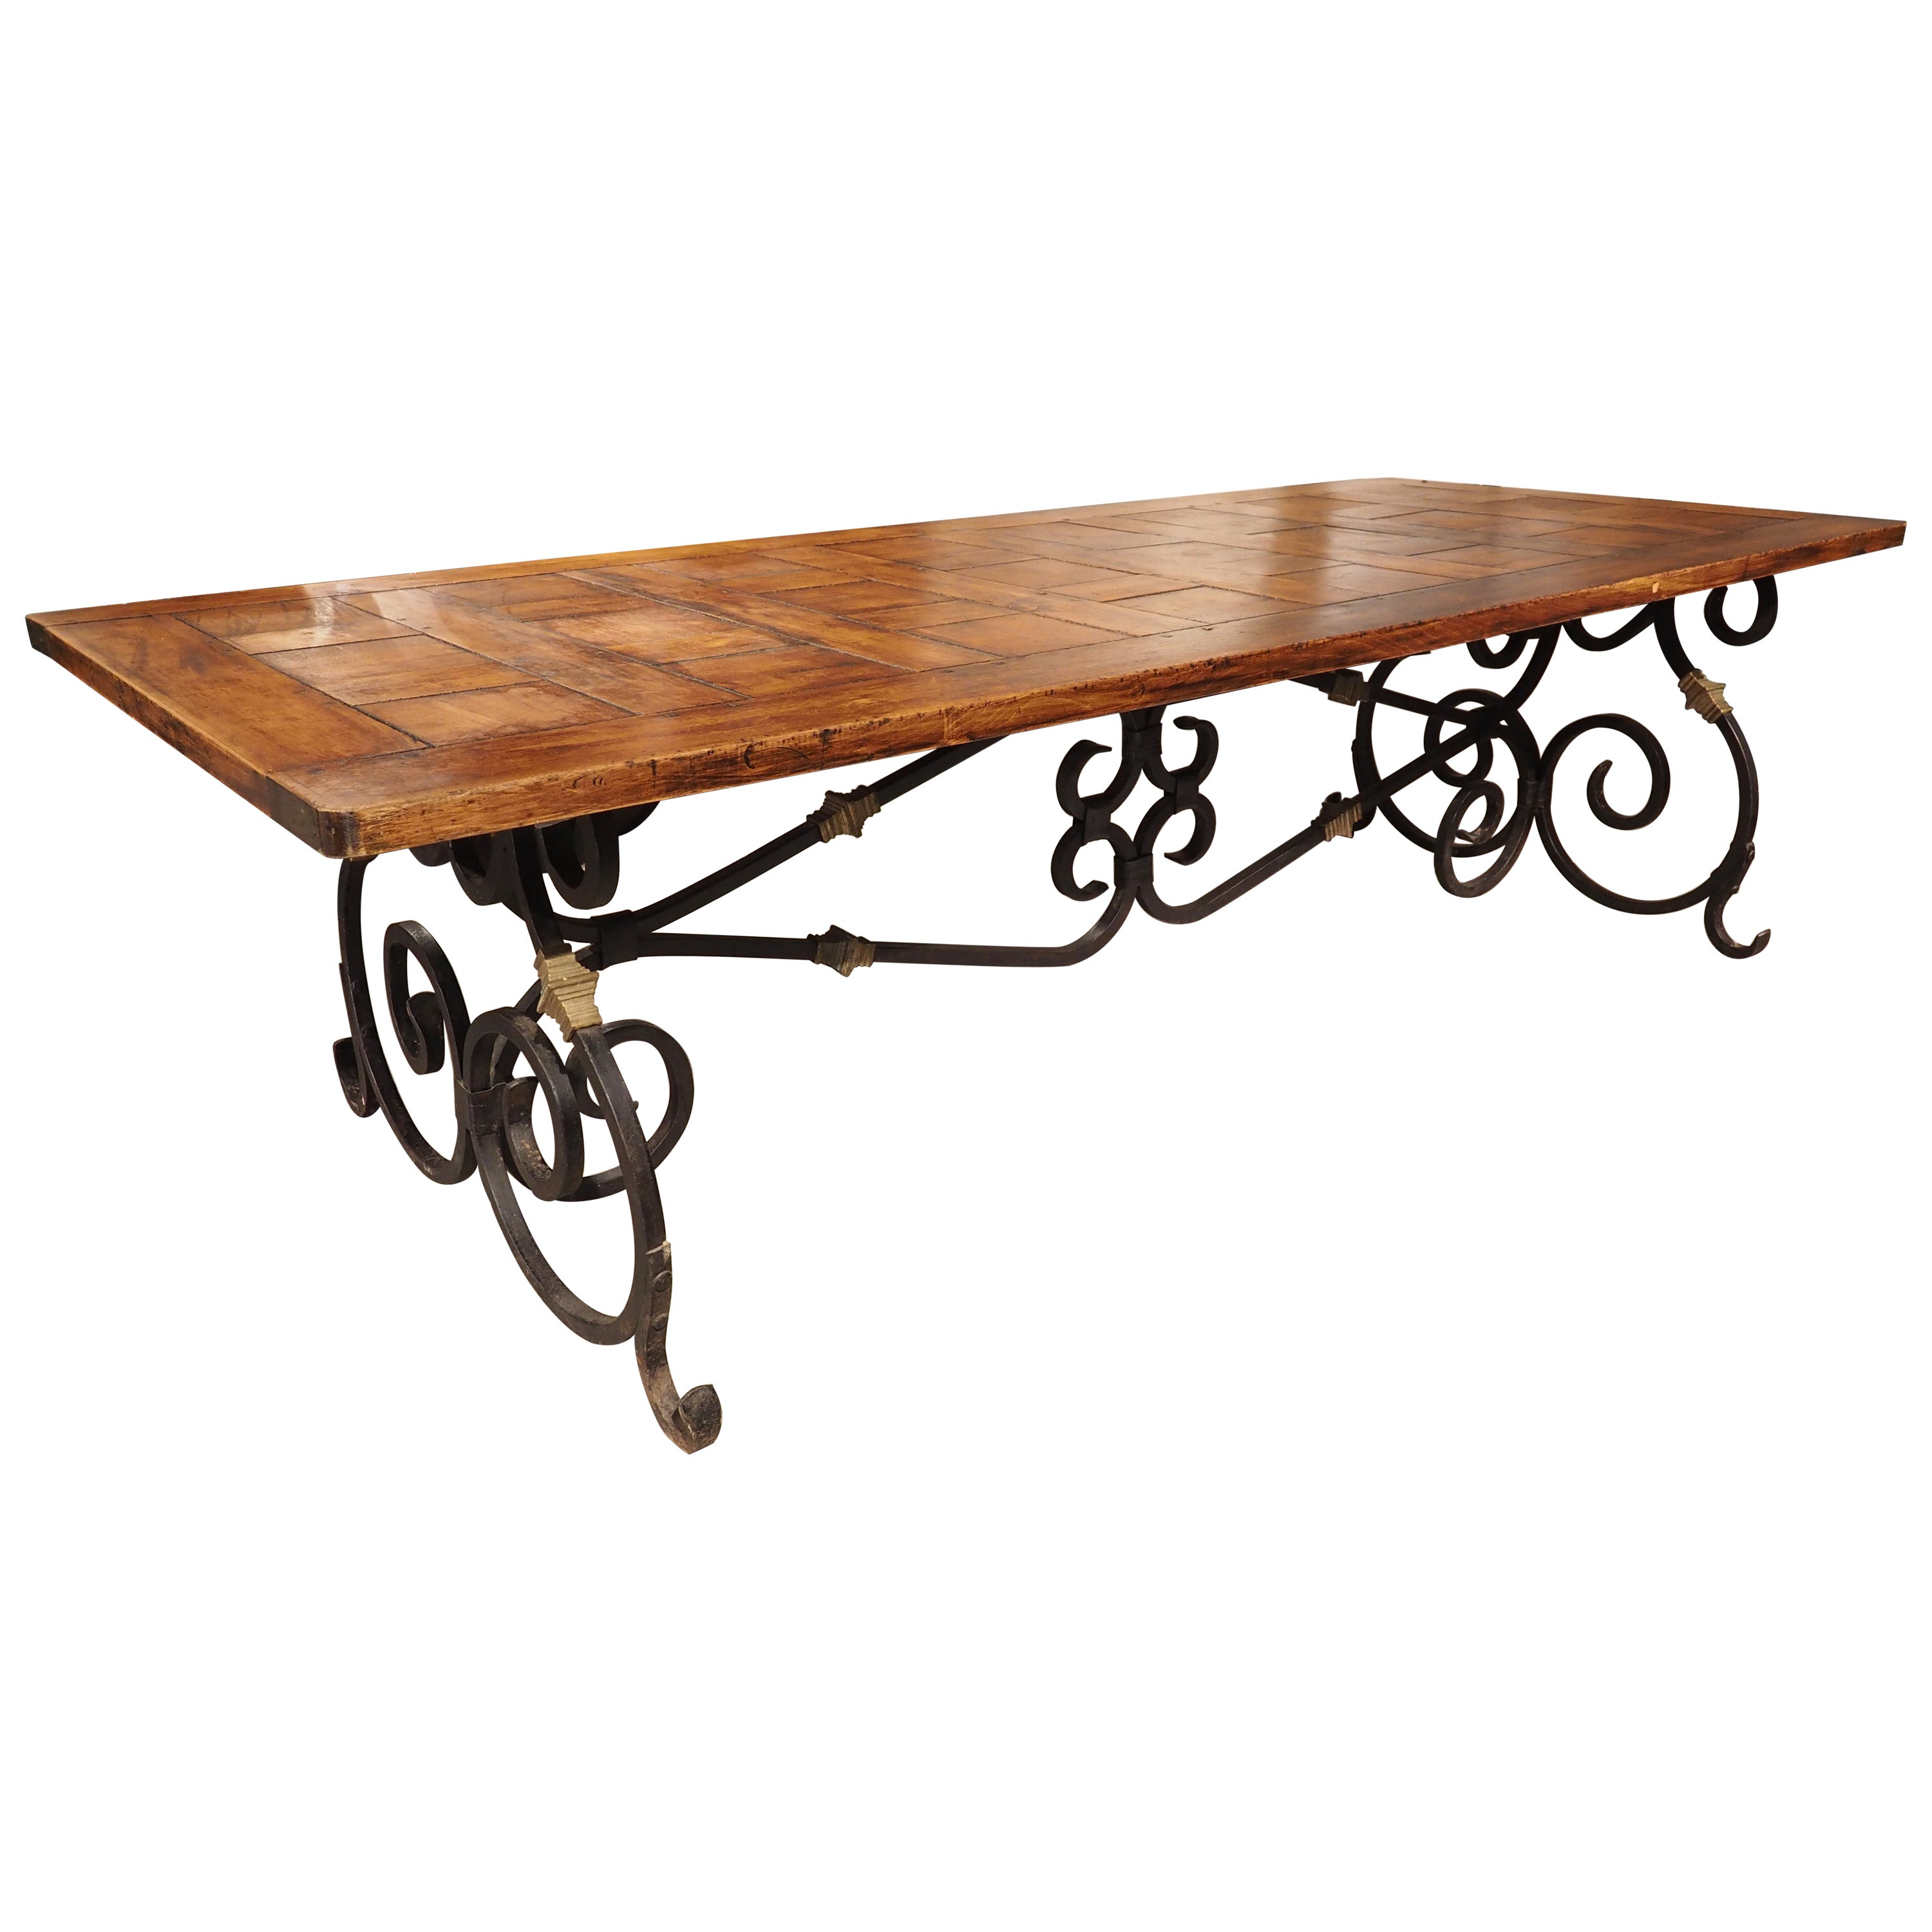 French Wrought Iron and Bronze Dining Table with Pegged Parquet Top, Circa 1940s